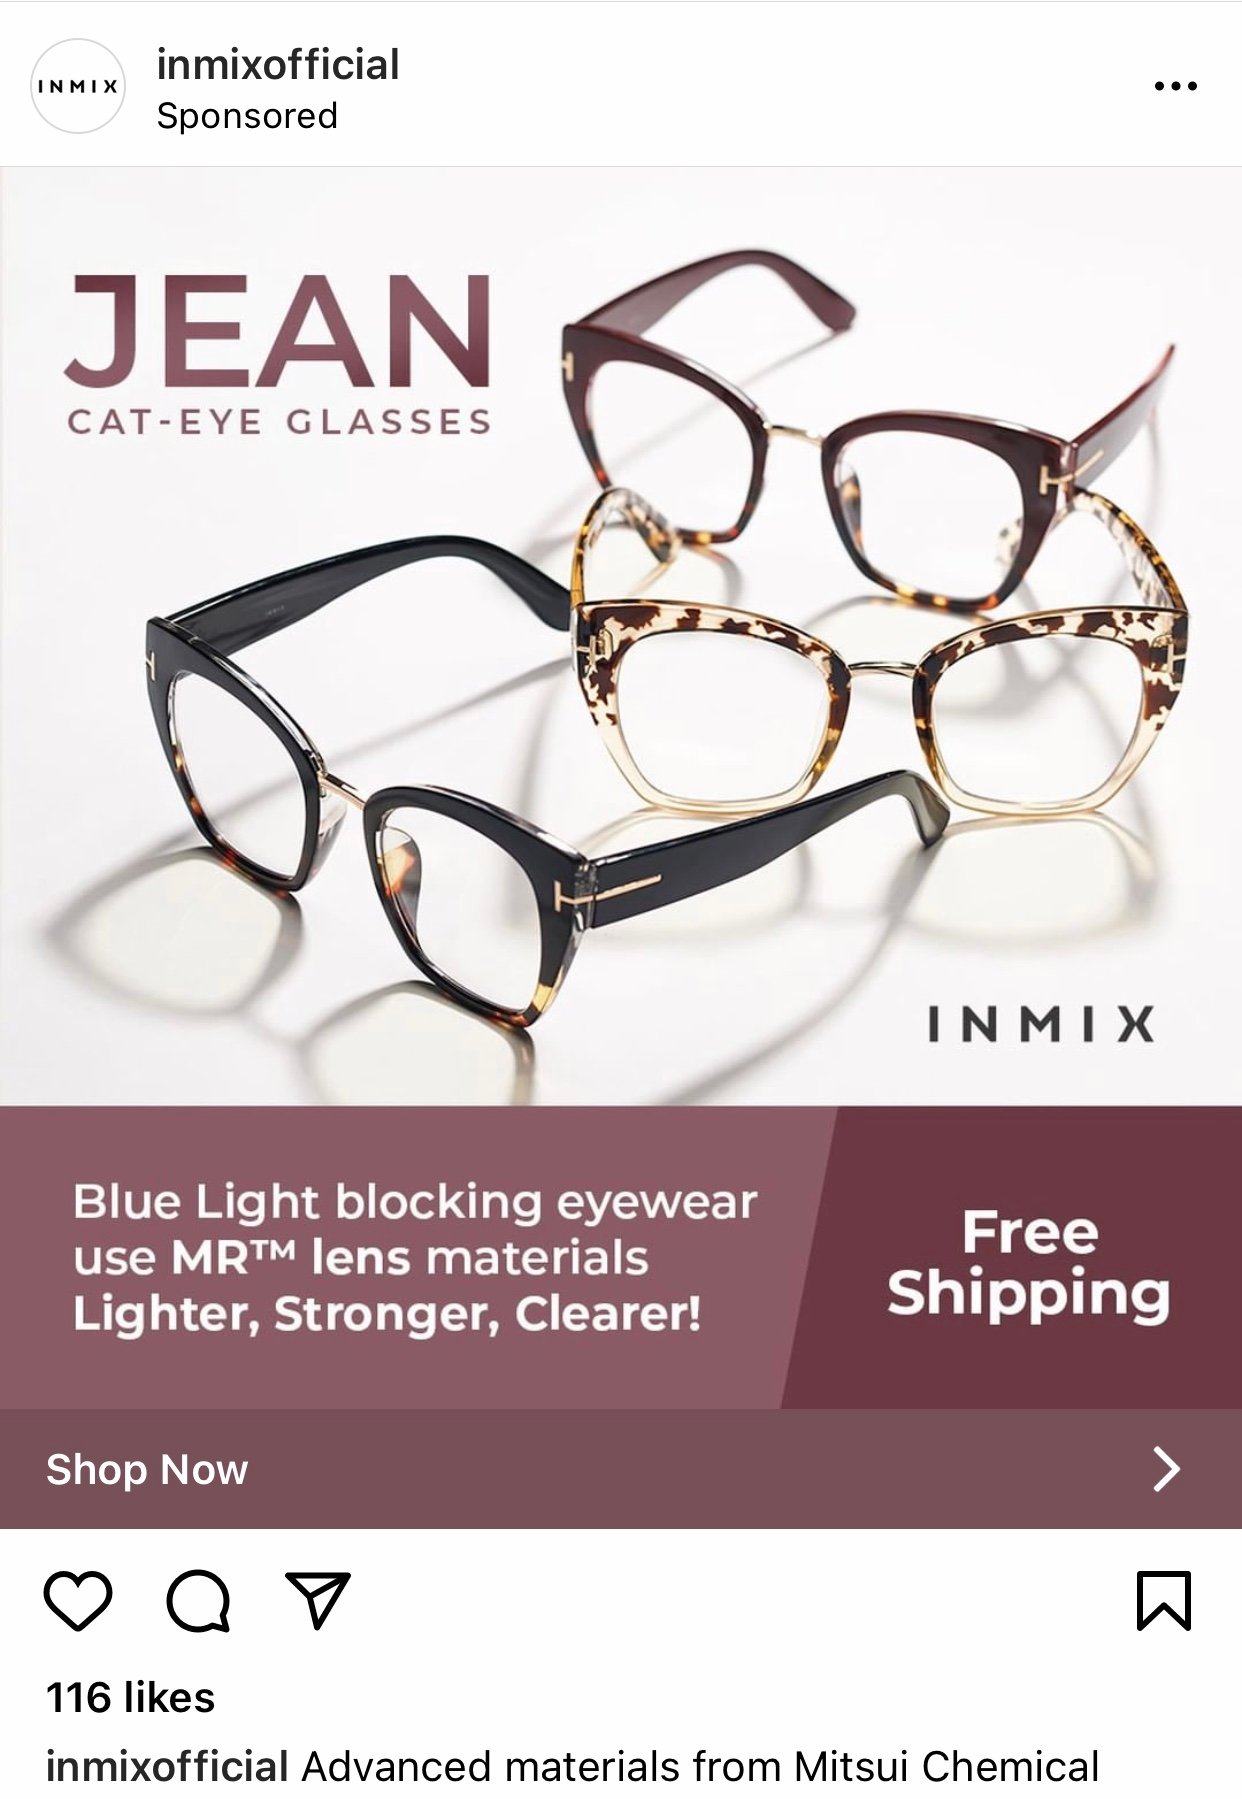 Instagram ads inmixofficial ad